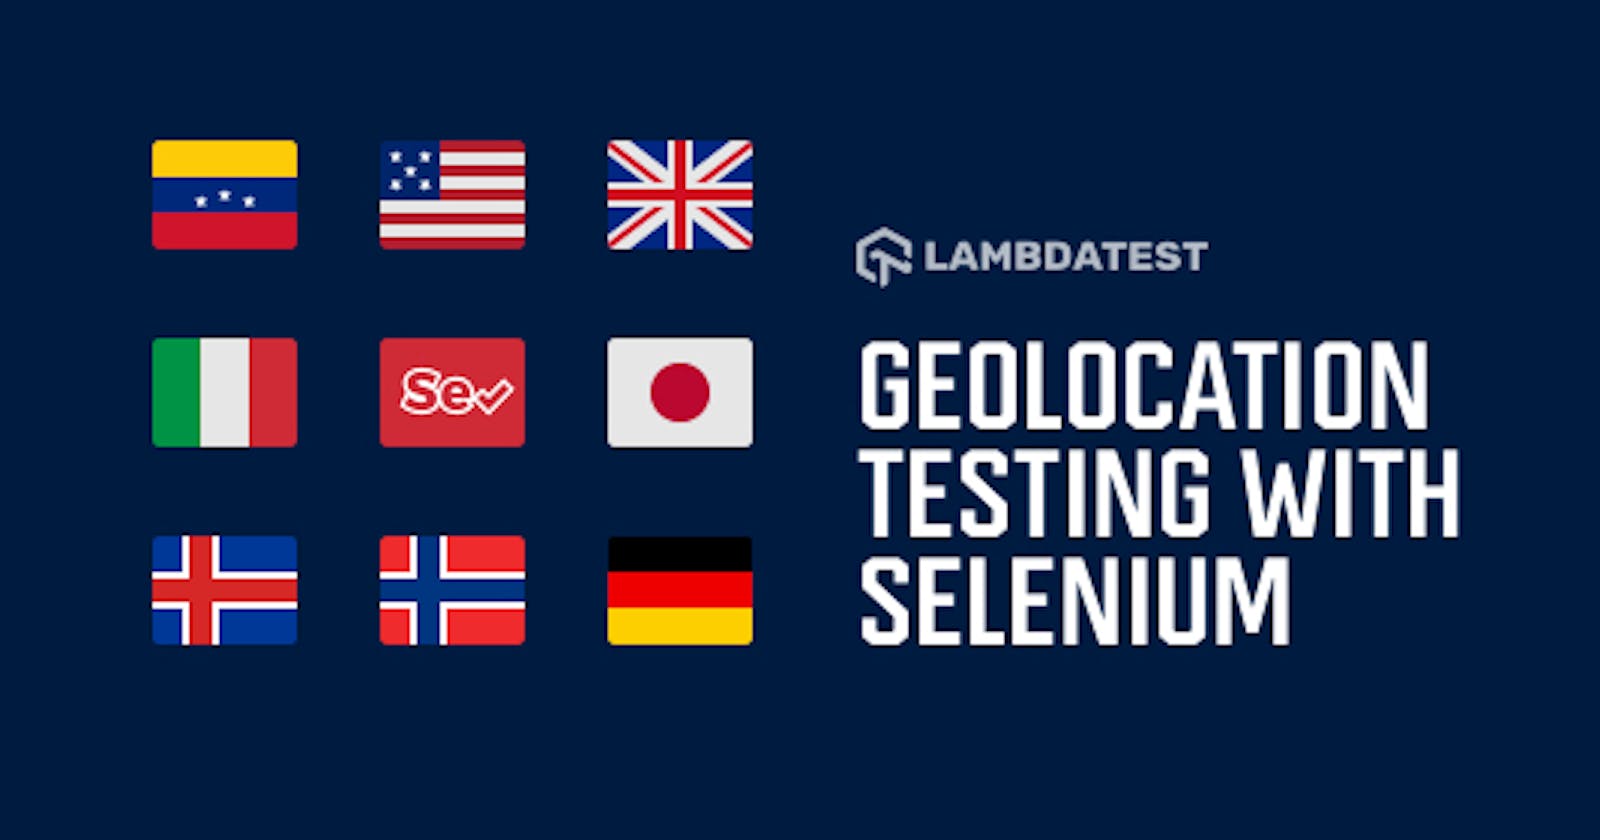 Geolocation Testing With Selenium Using Examples